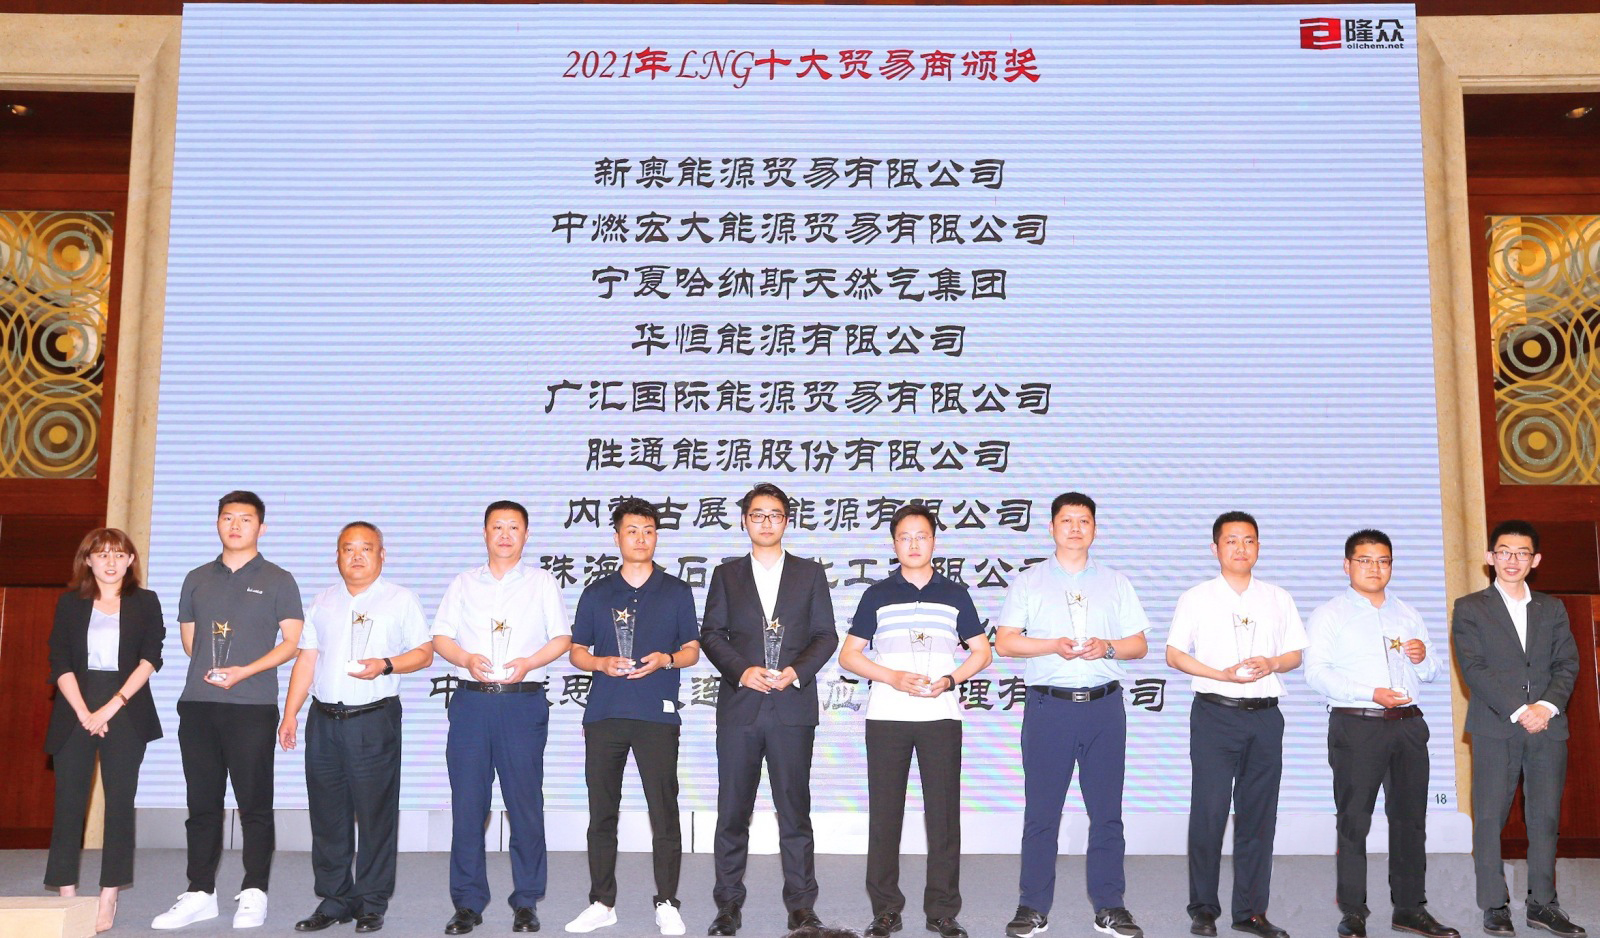 Hanas natural gas group won the title of “top 10 natural gas traders in China” in 2020